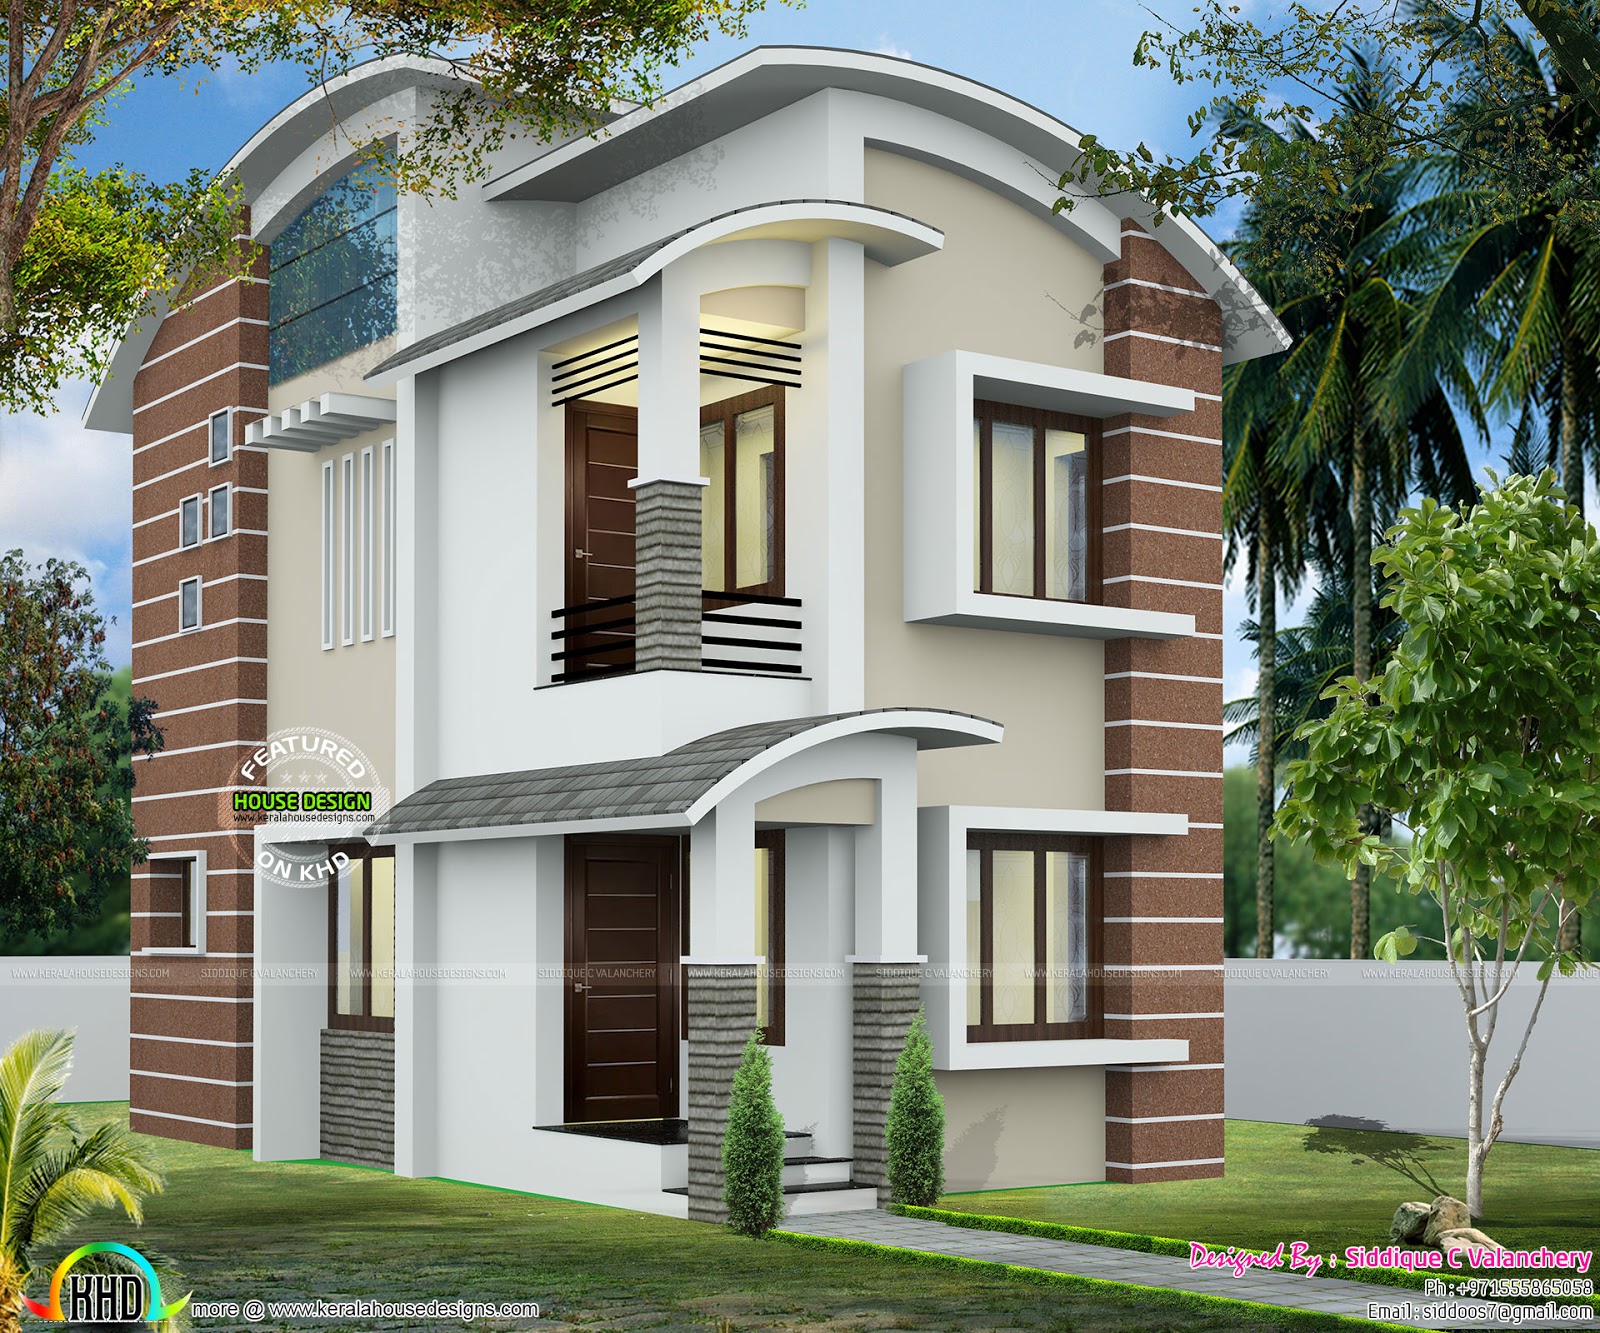 Blueprint of small double storied house - Kerala home ...